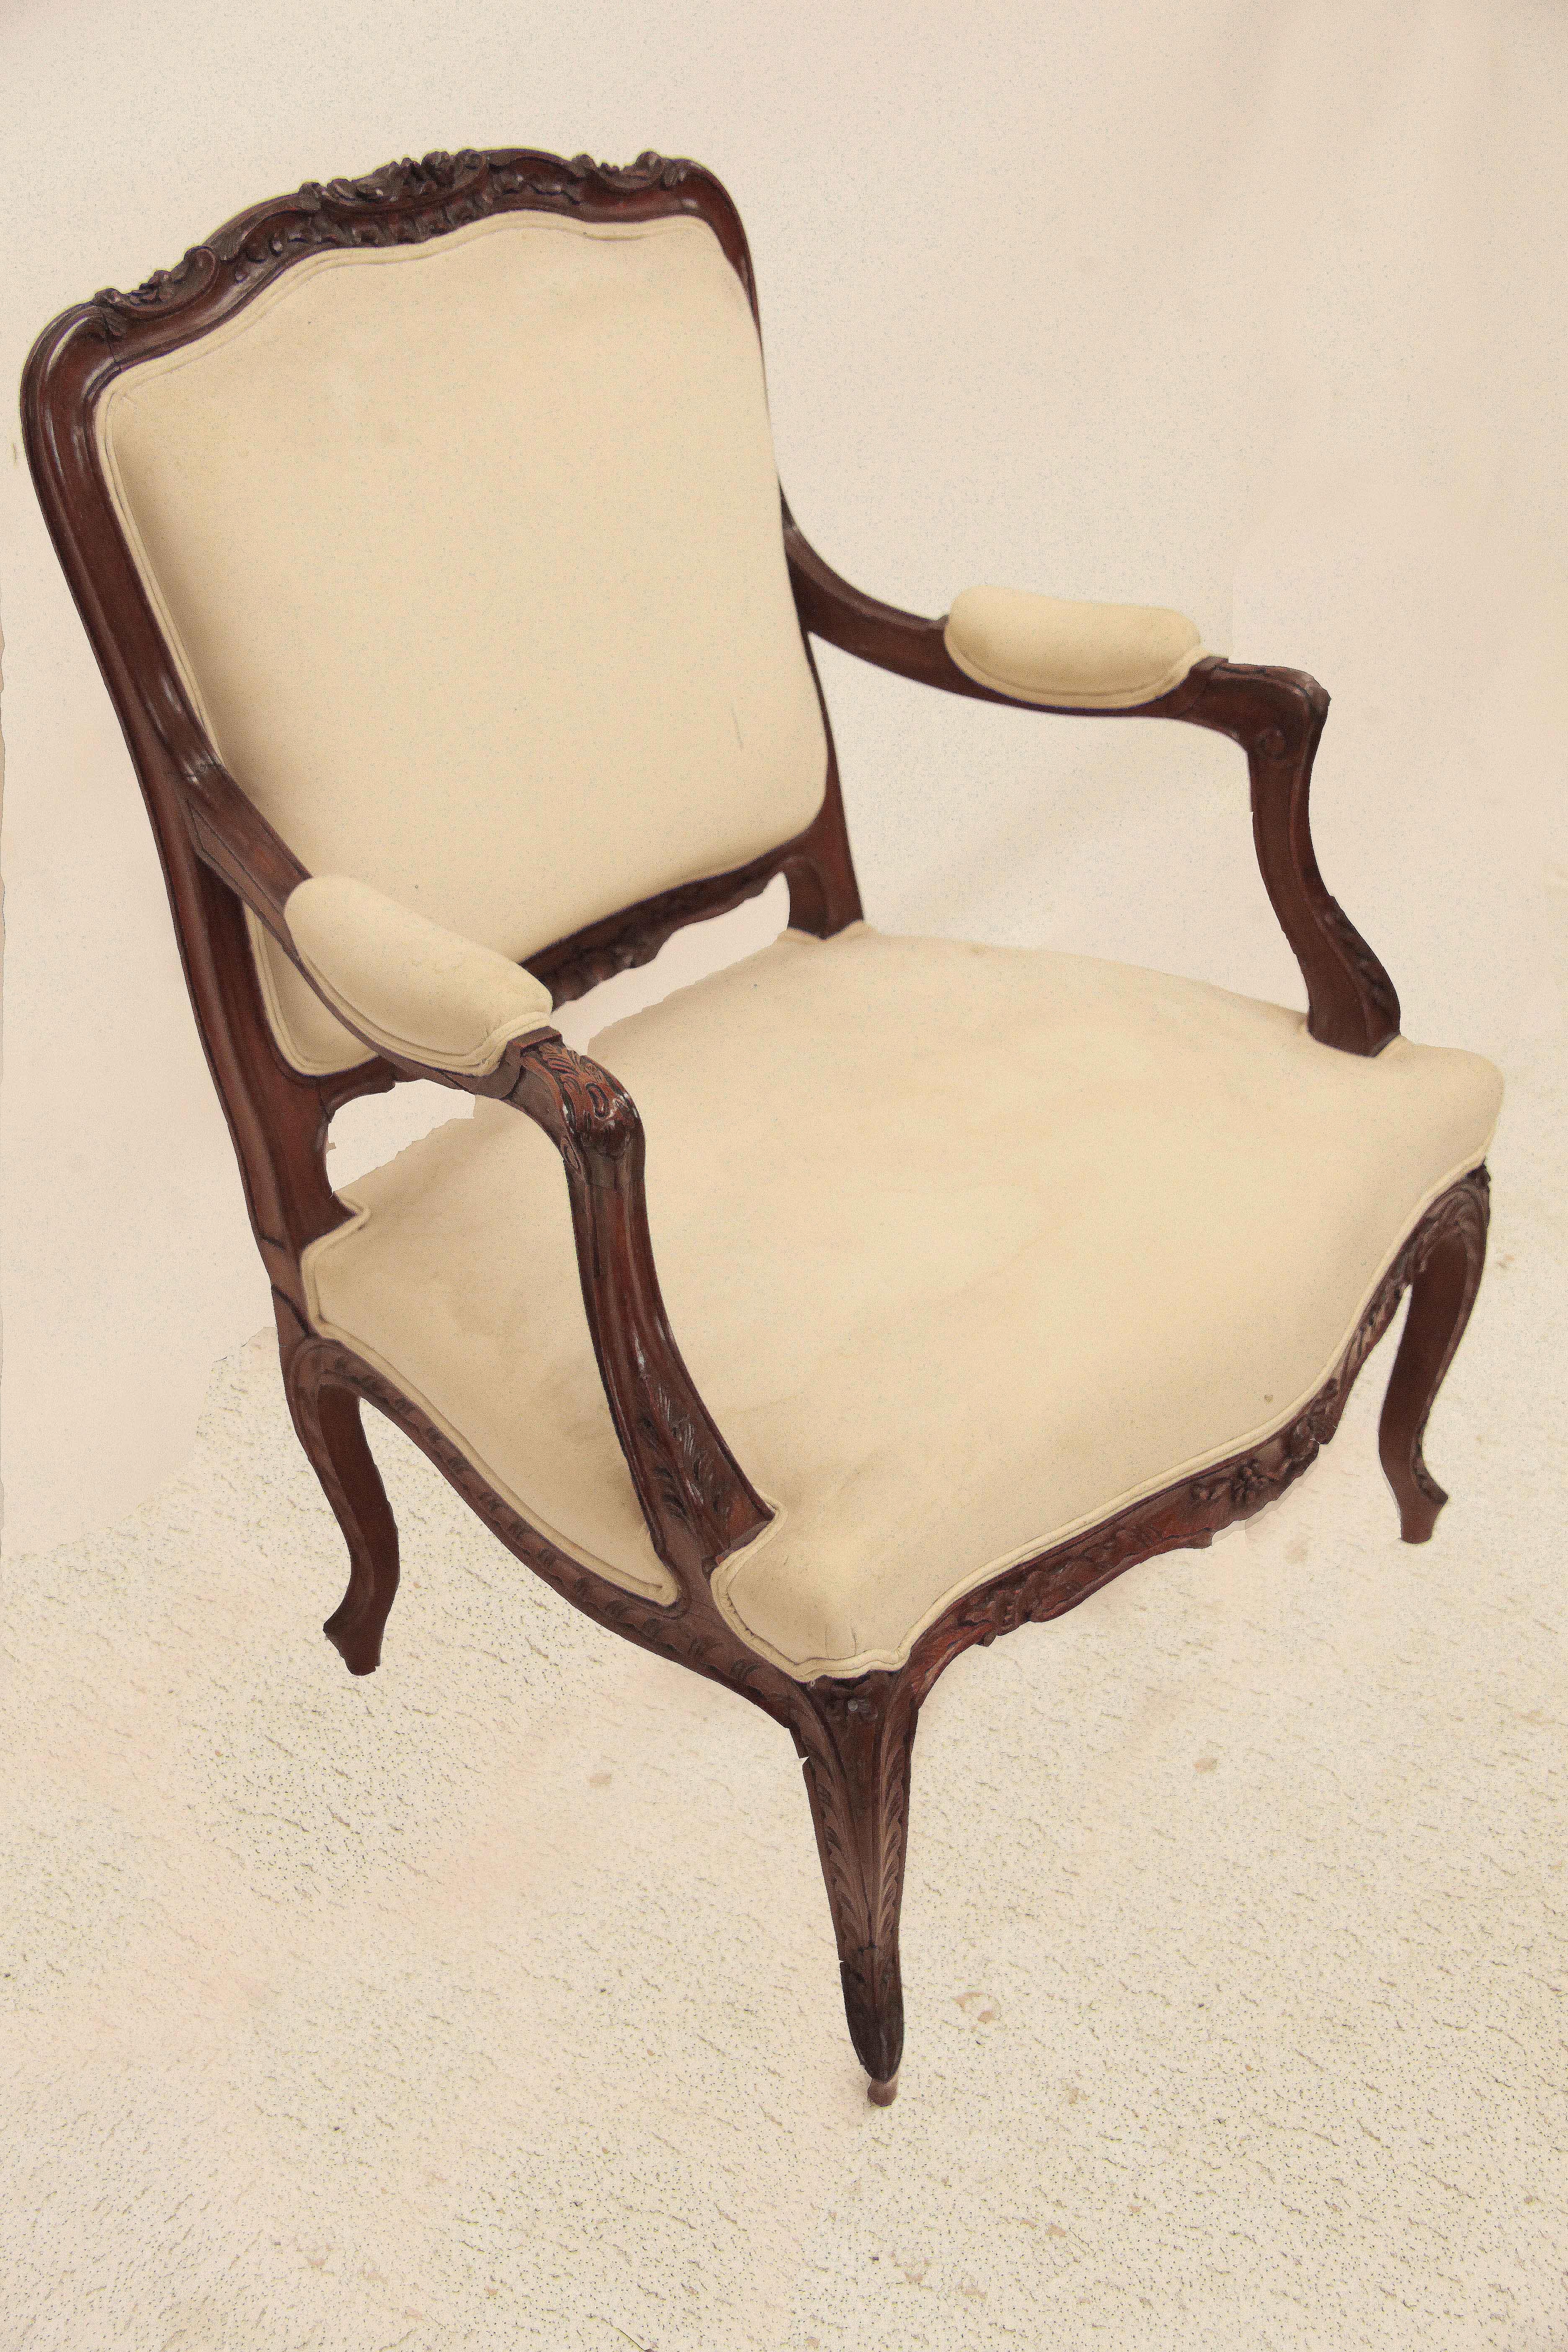 Carved French bergere chair, the serpentine crest rail with carved flowers and foliate, the arms have carved foliate with carved volutes on either side; base of the arms with carved acanthus; entire chair is covered in muslin. The serpentine shaped